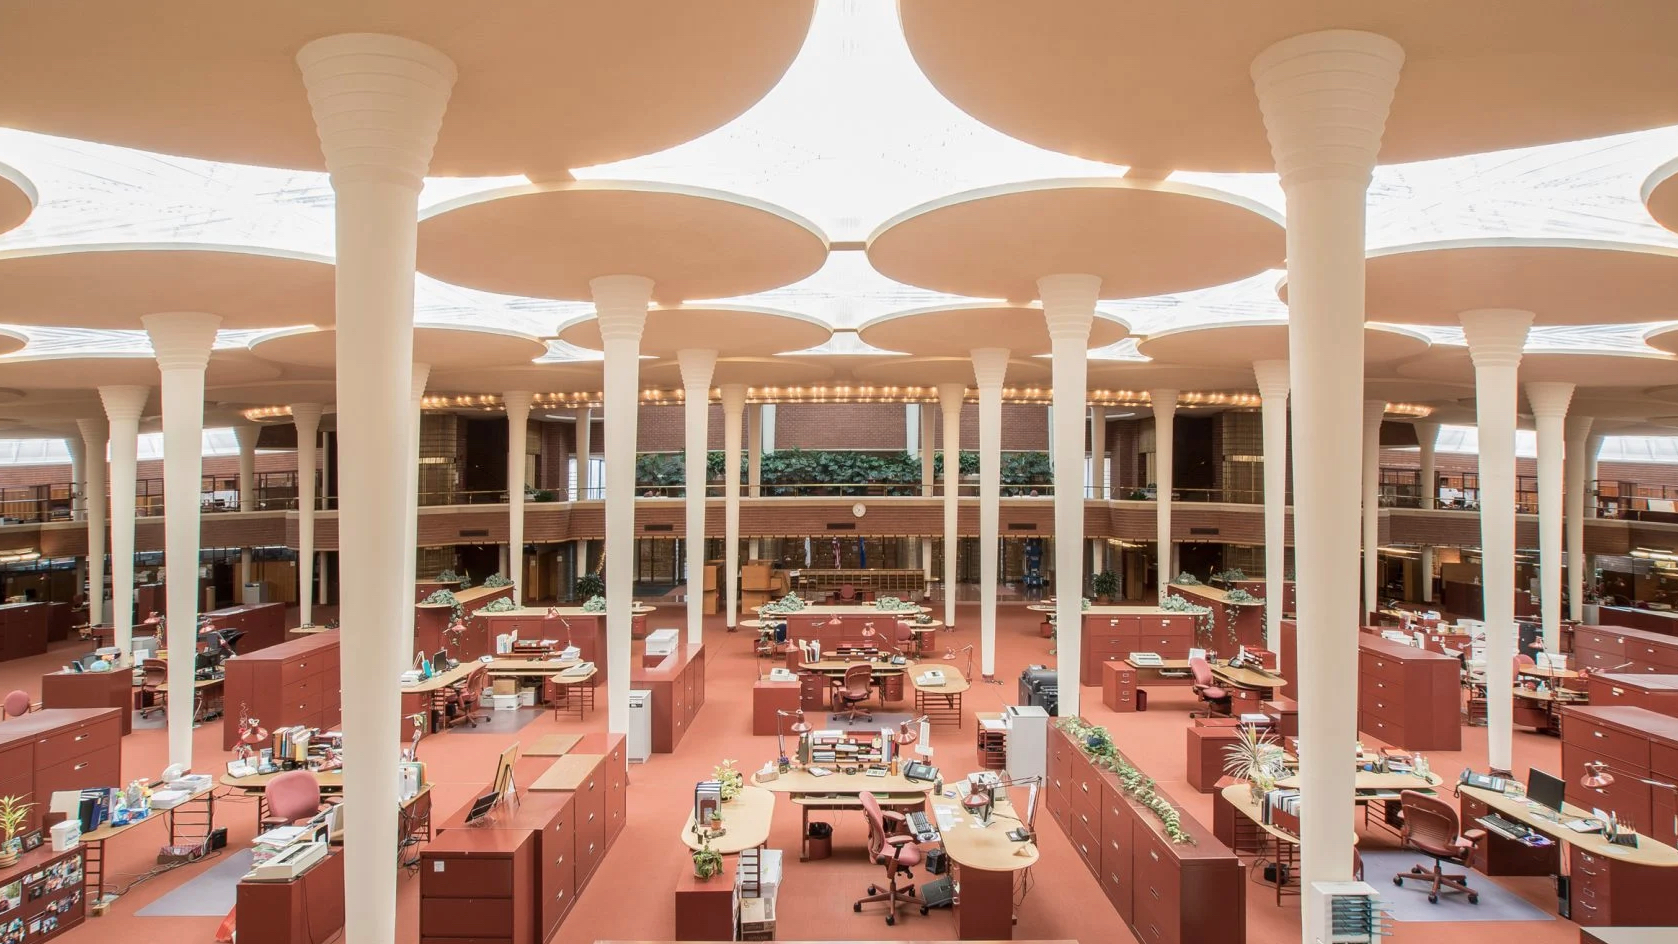 A Look at Frank Lloyd Wright’s Unsold Designs